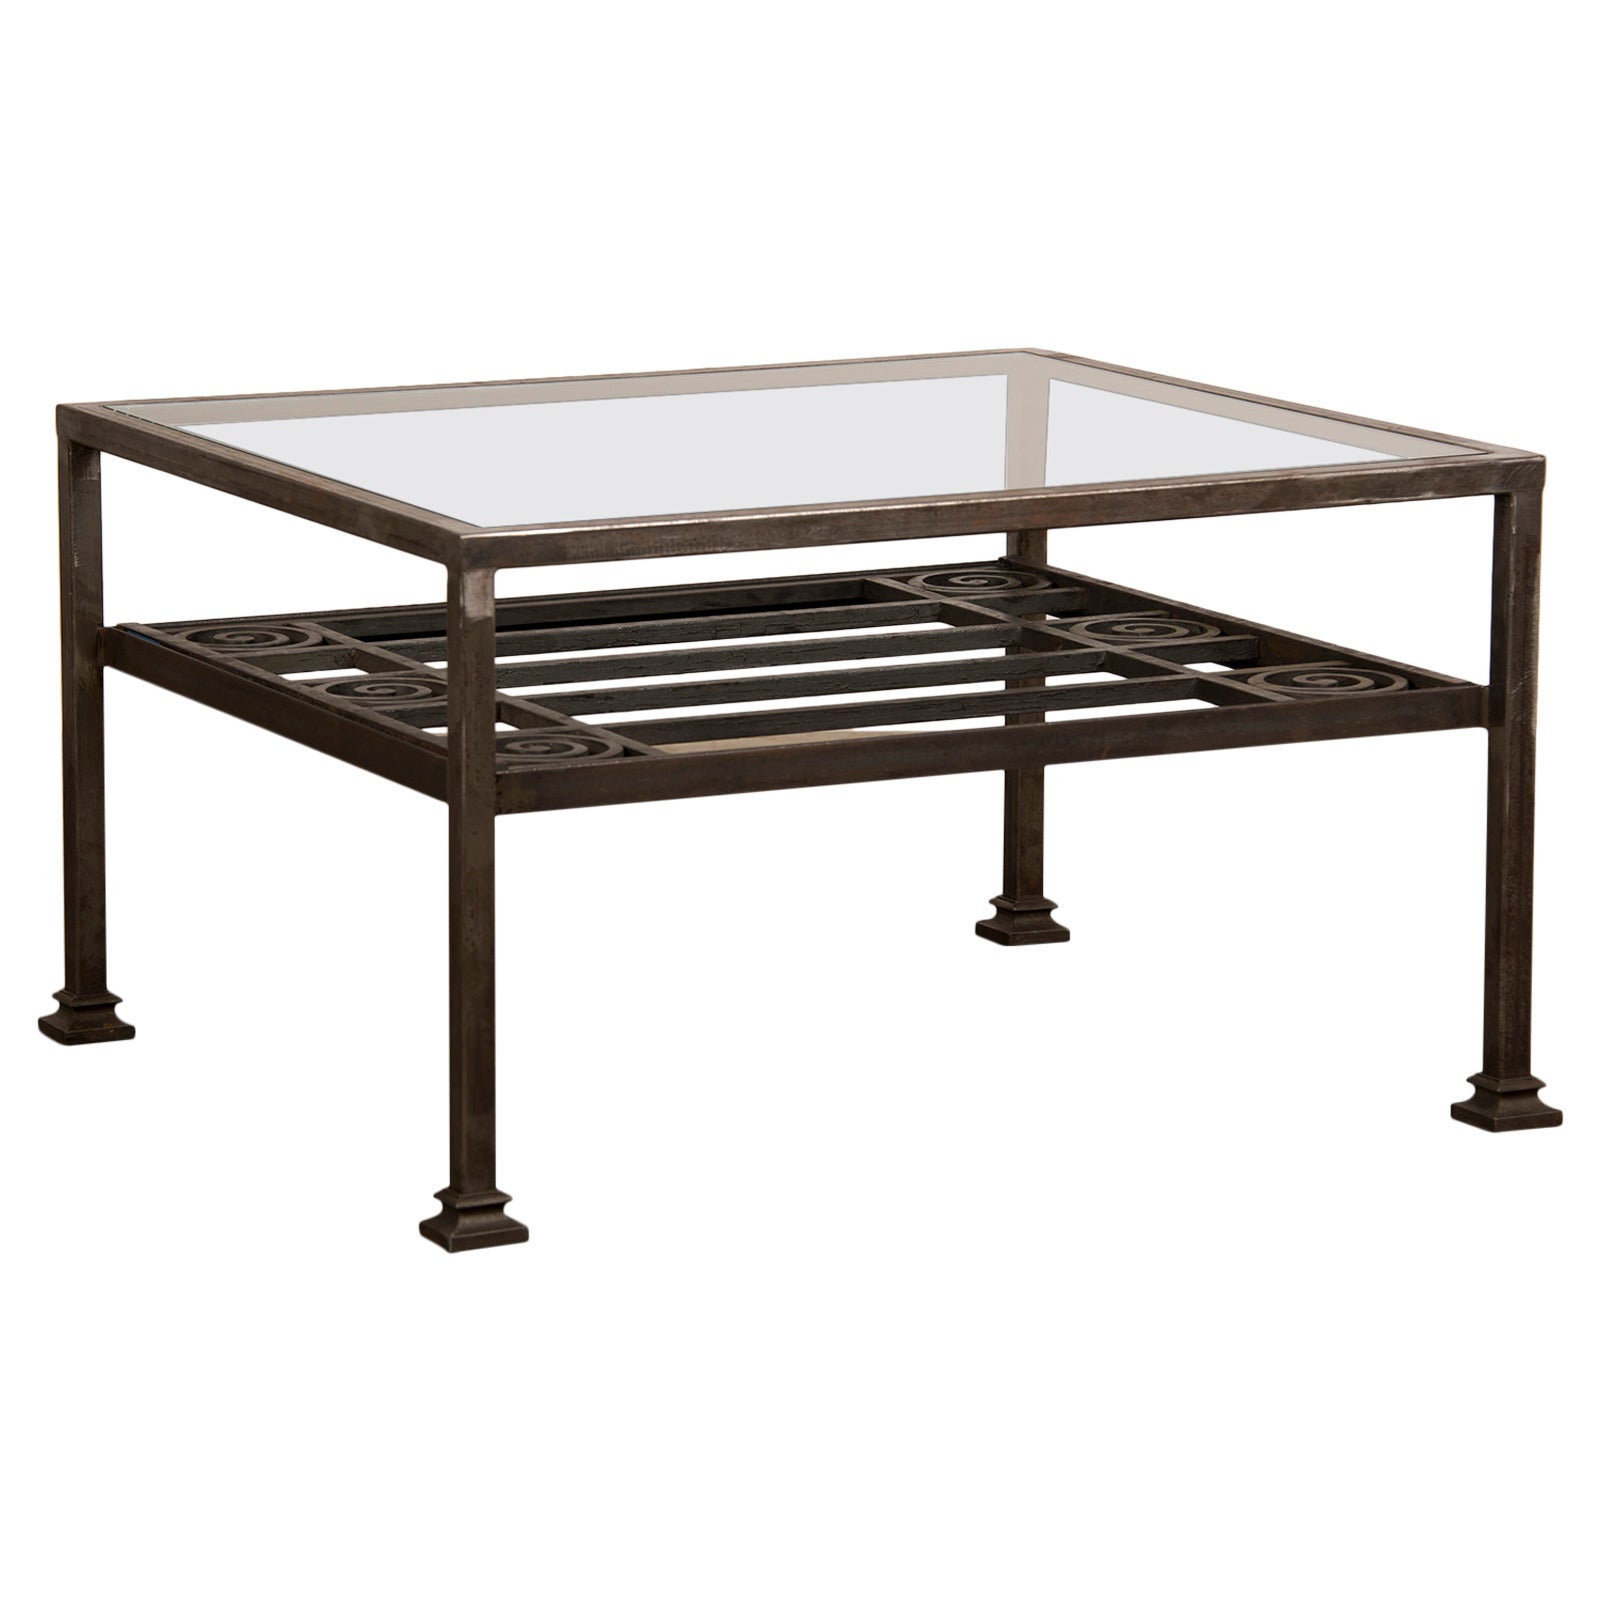 Art Deco Period Forged Iron Grate, France circa 1930, Custom Coffee Table